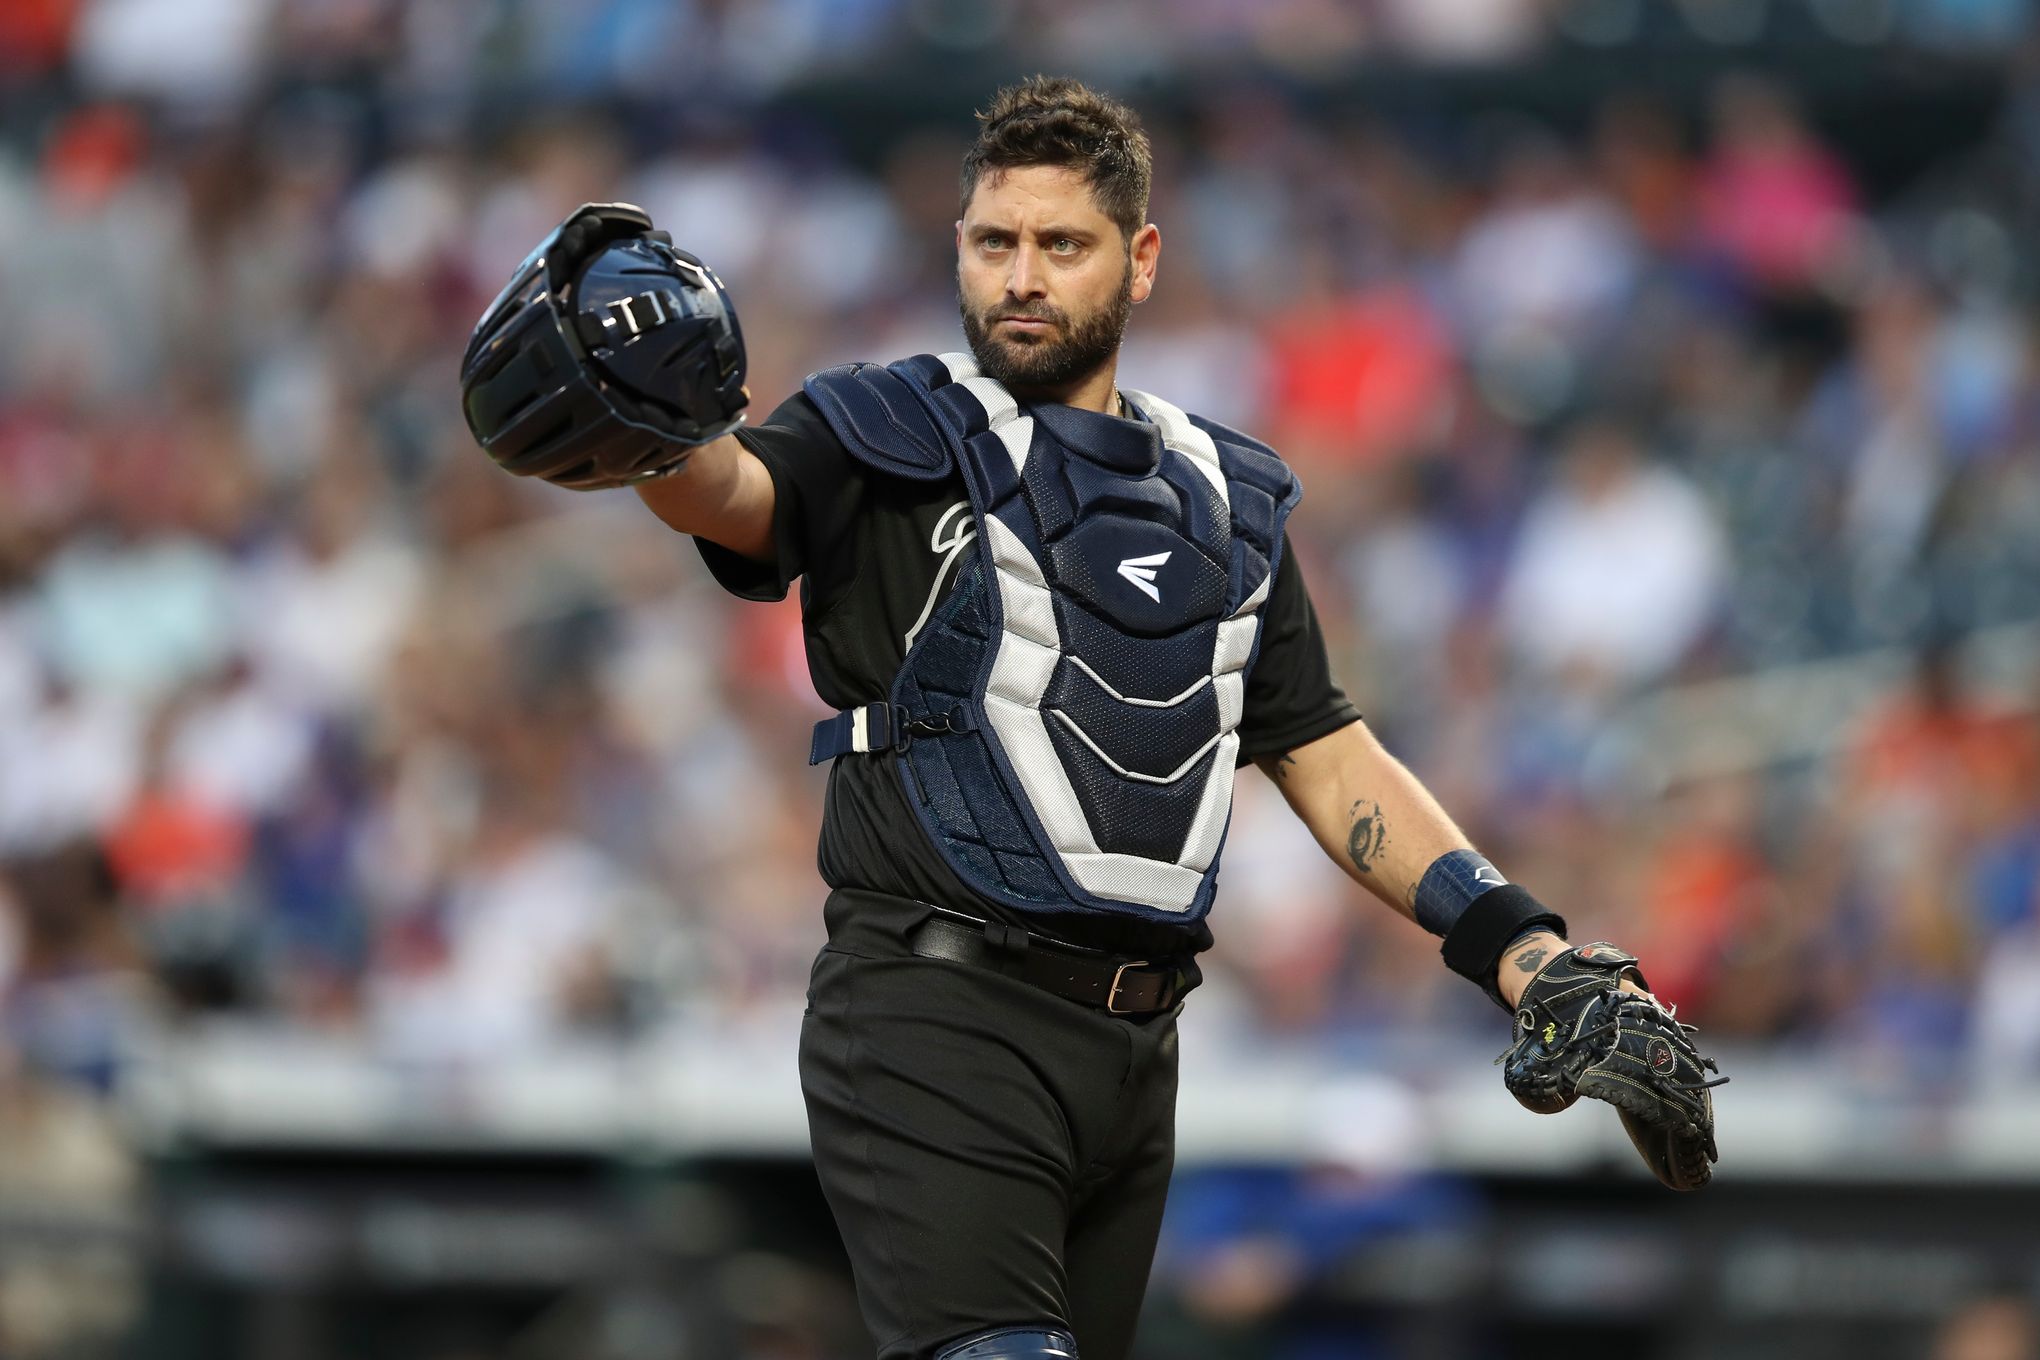 New York Yankees Francisco Cervelli behind home plate